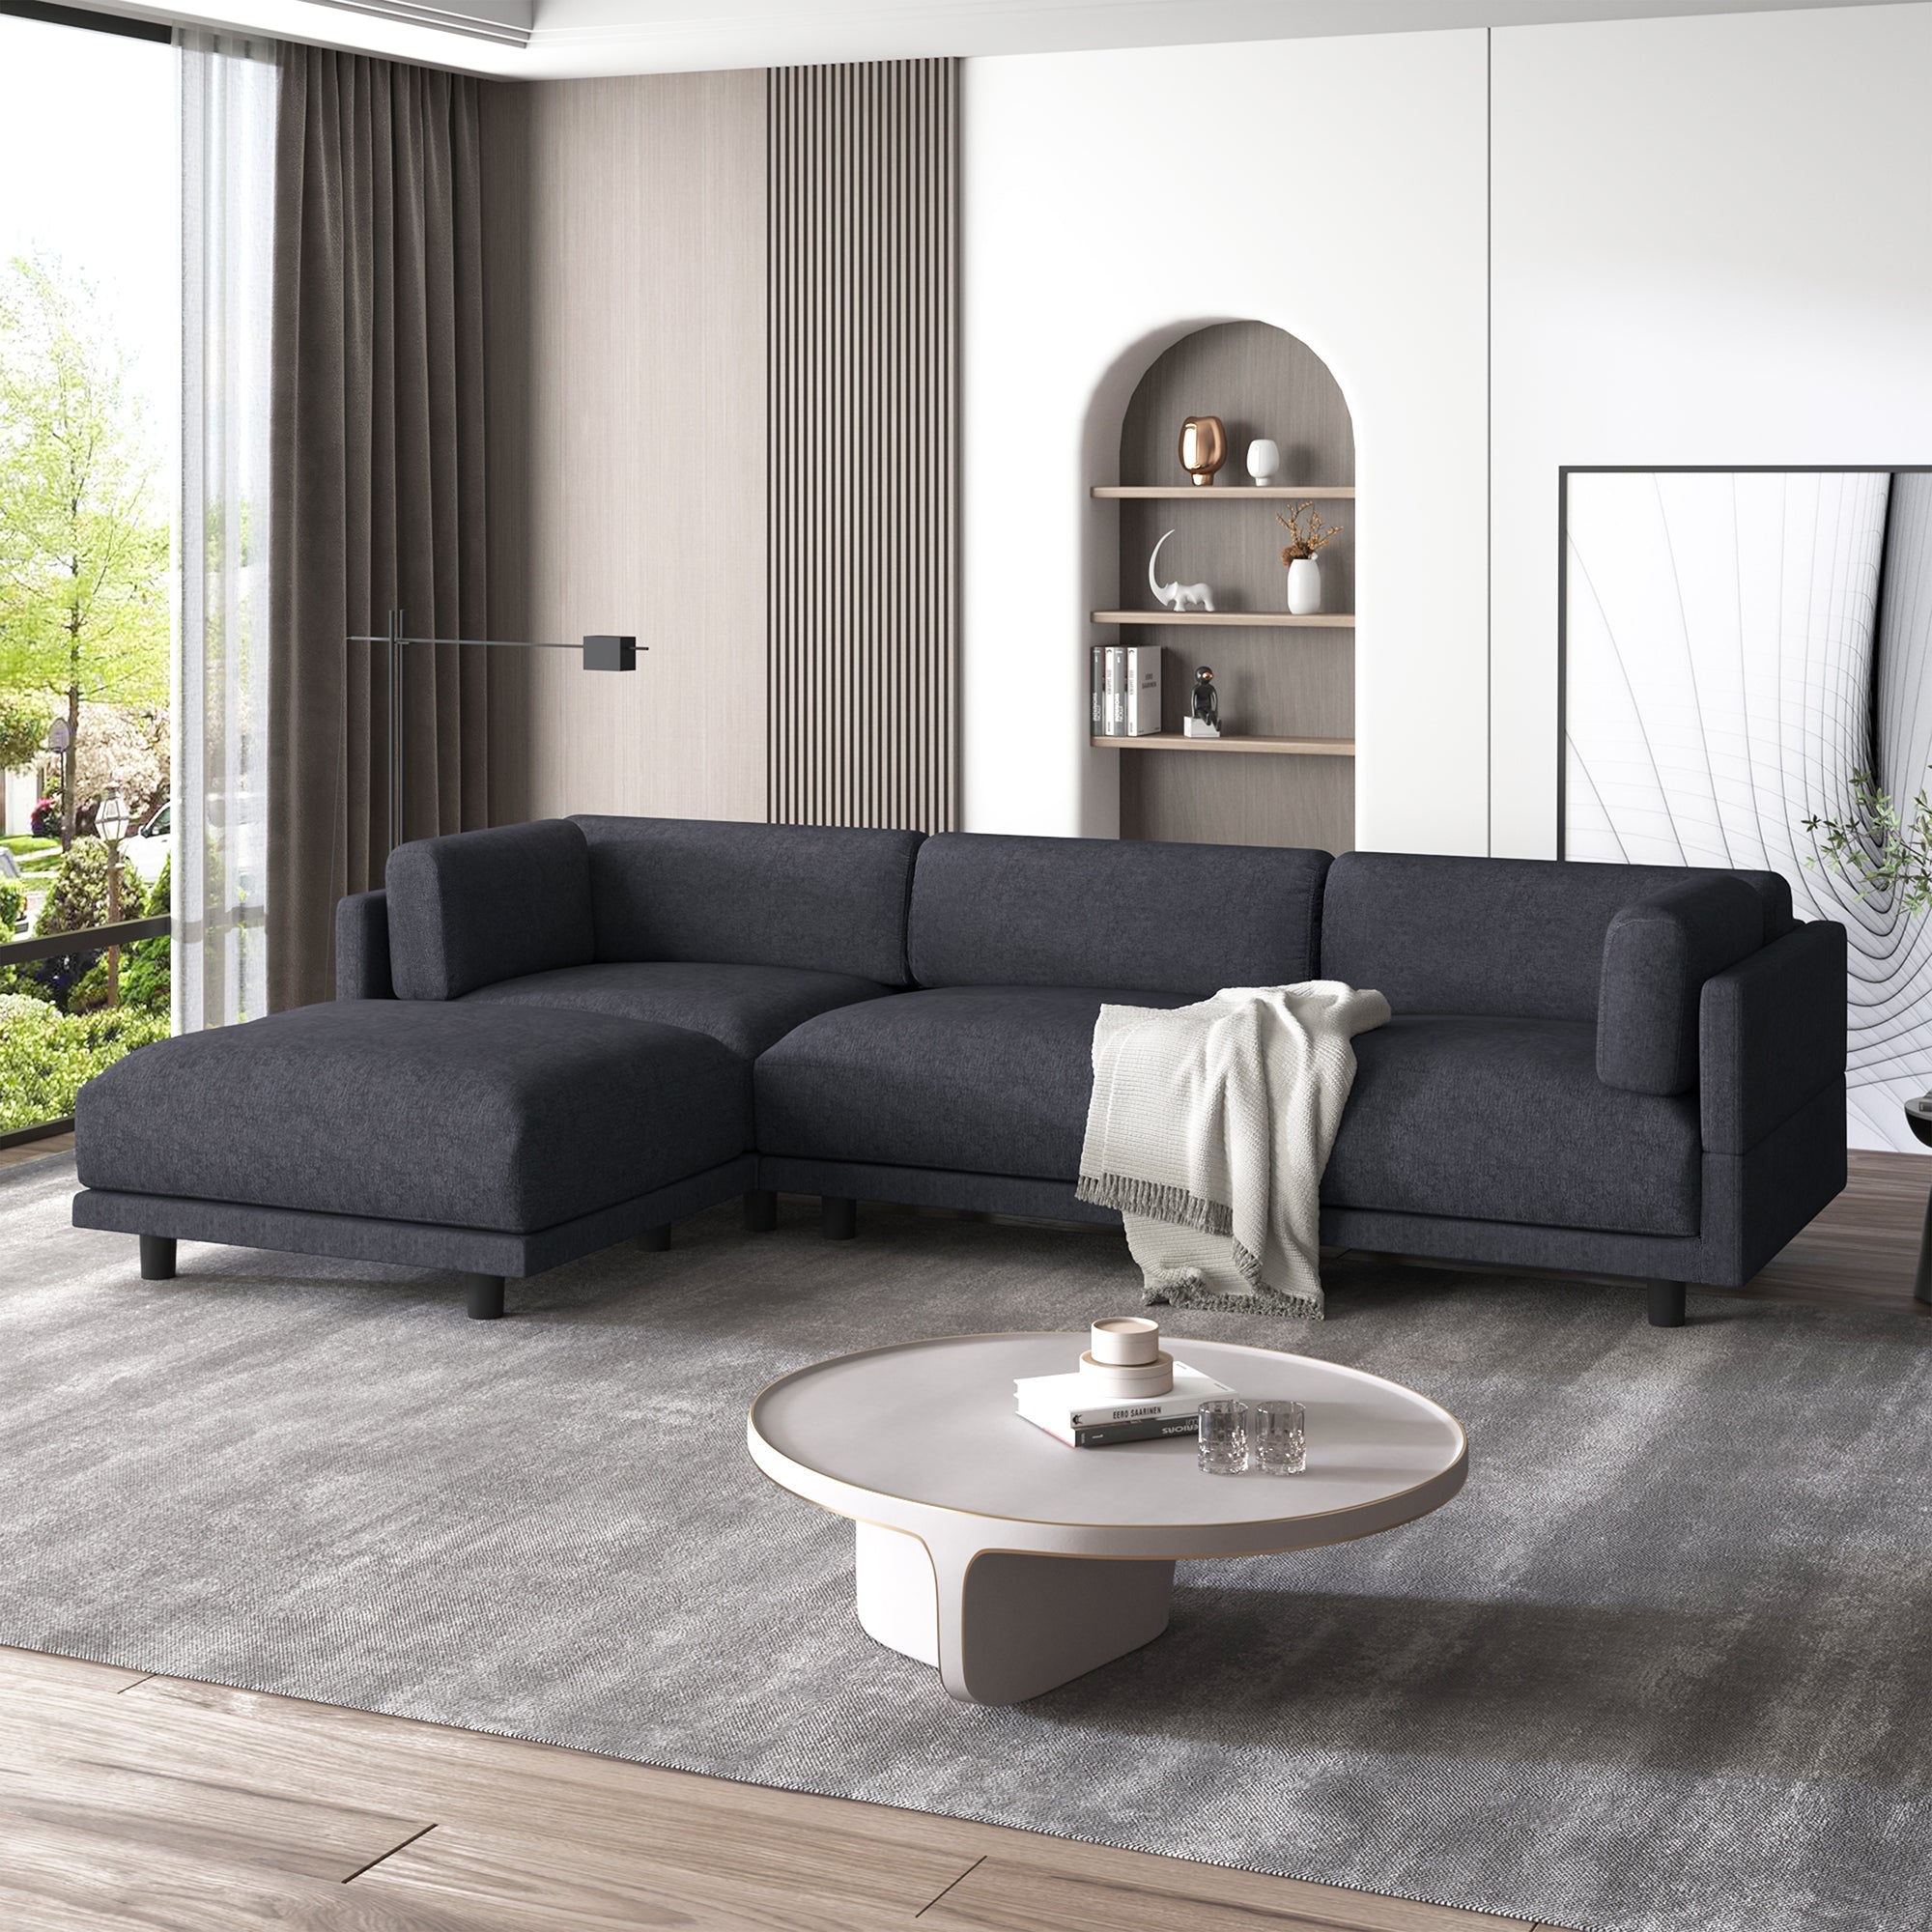 Gray Upholstery Convertible Sectional Sofa: L-Shaped, Reversible Chaise-Stationary Sectionals-American Furniture Outlet